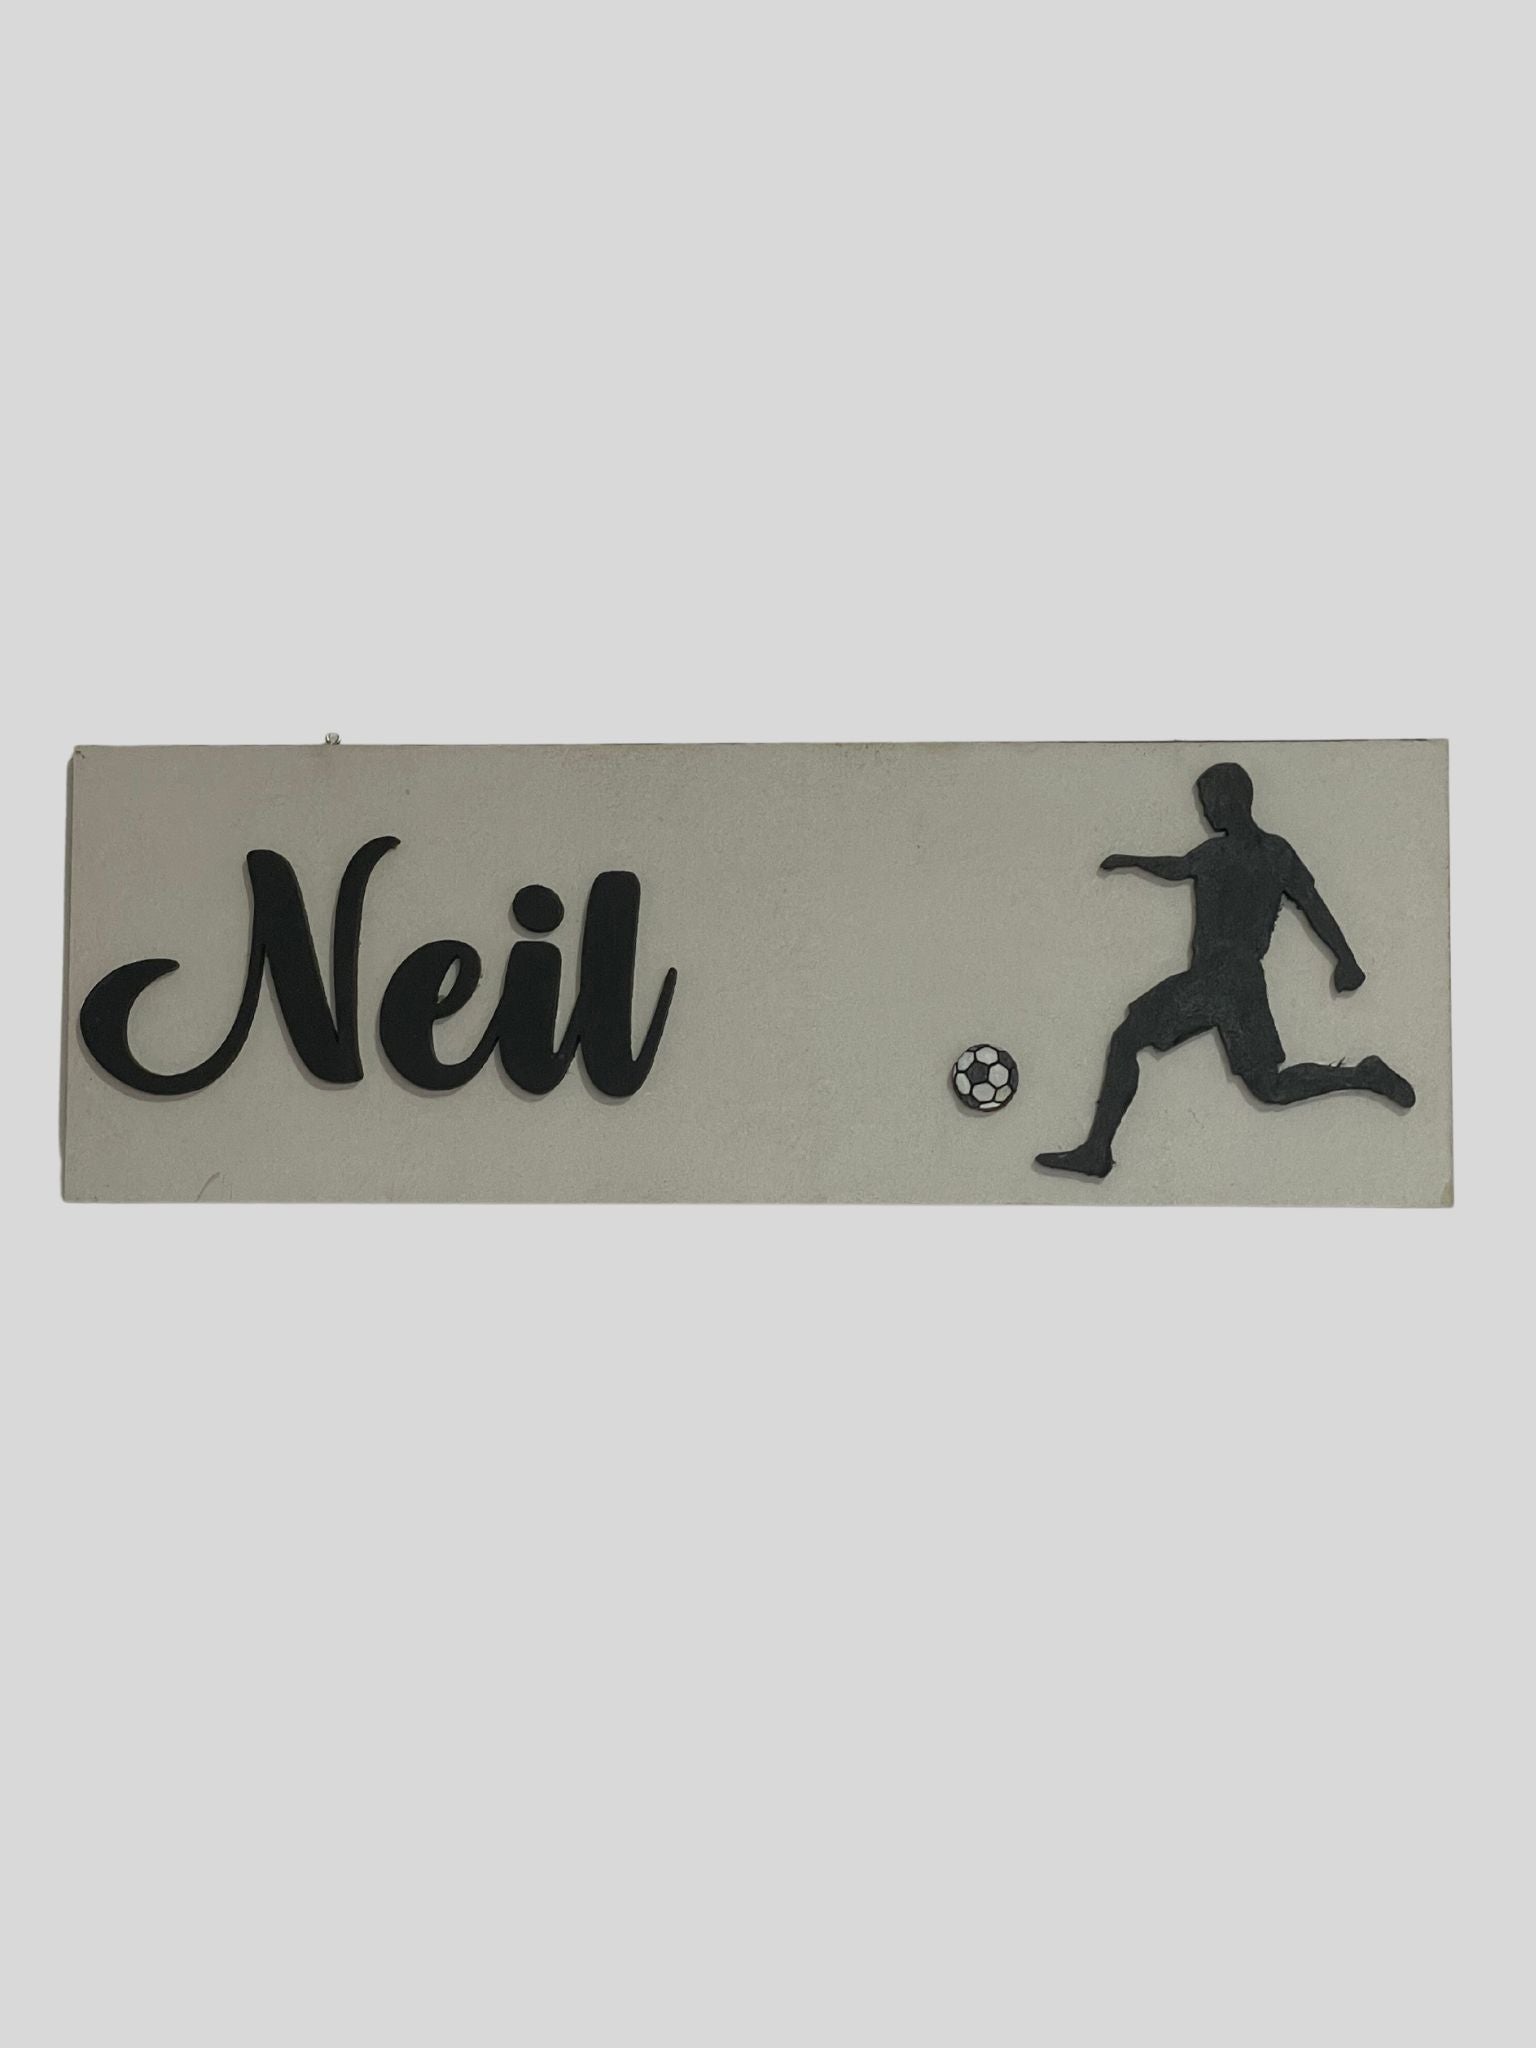 Kids Bedroom Door Sign , Personalised Sign for Study Area - Football | Soccer - Name Plaques